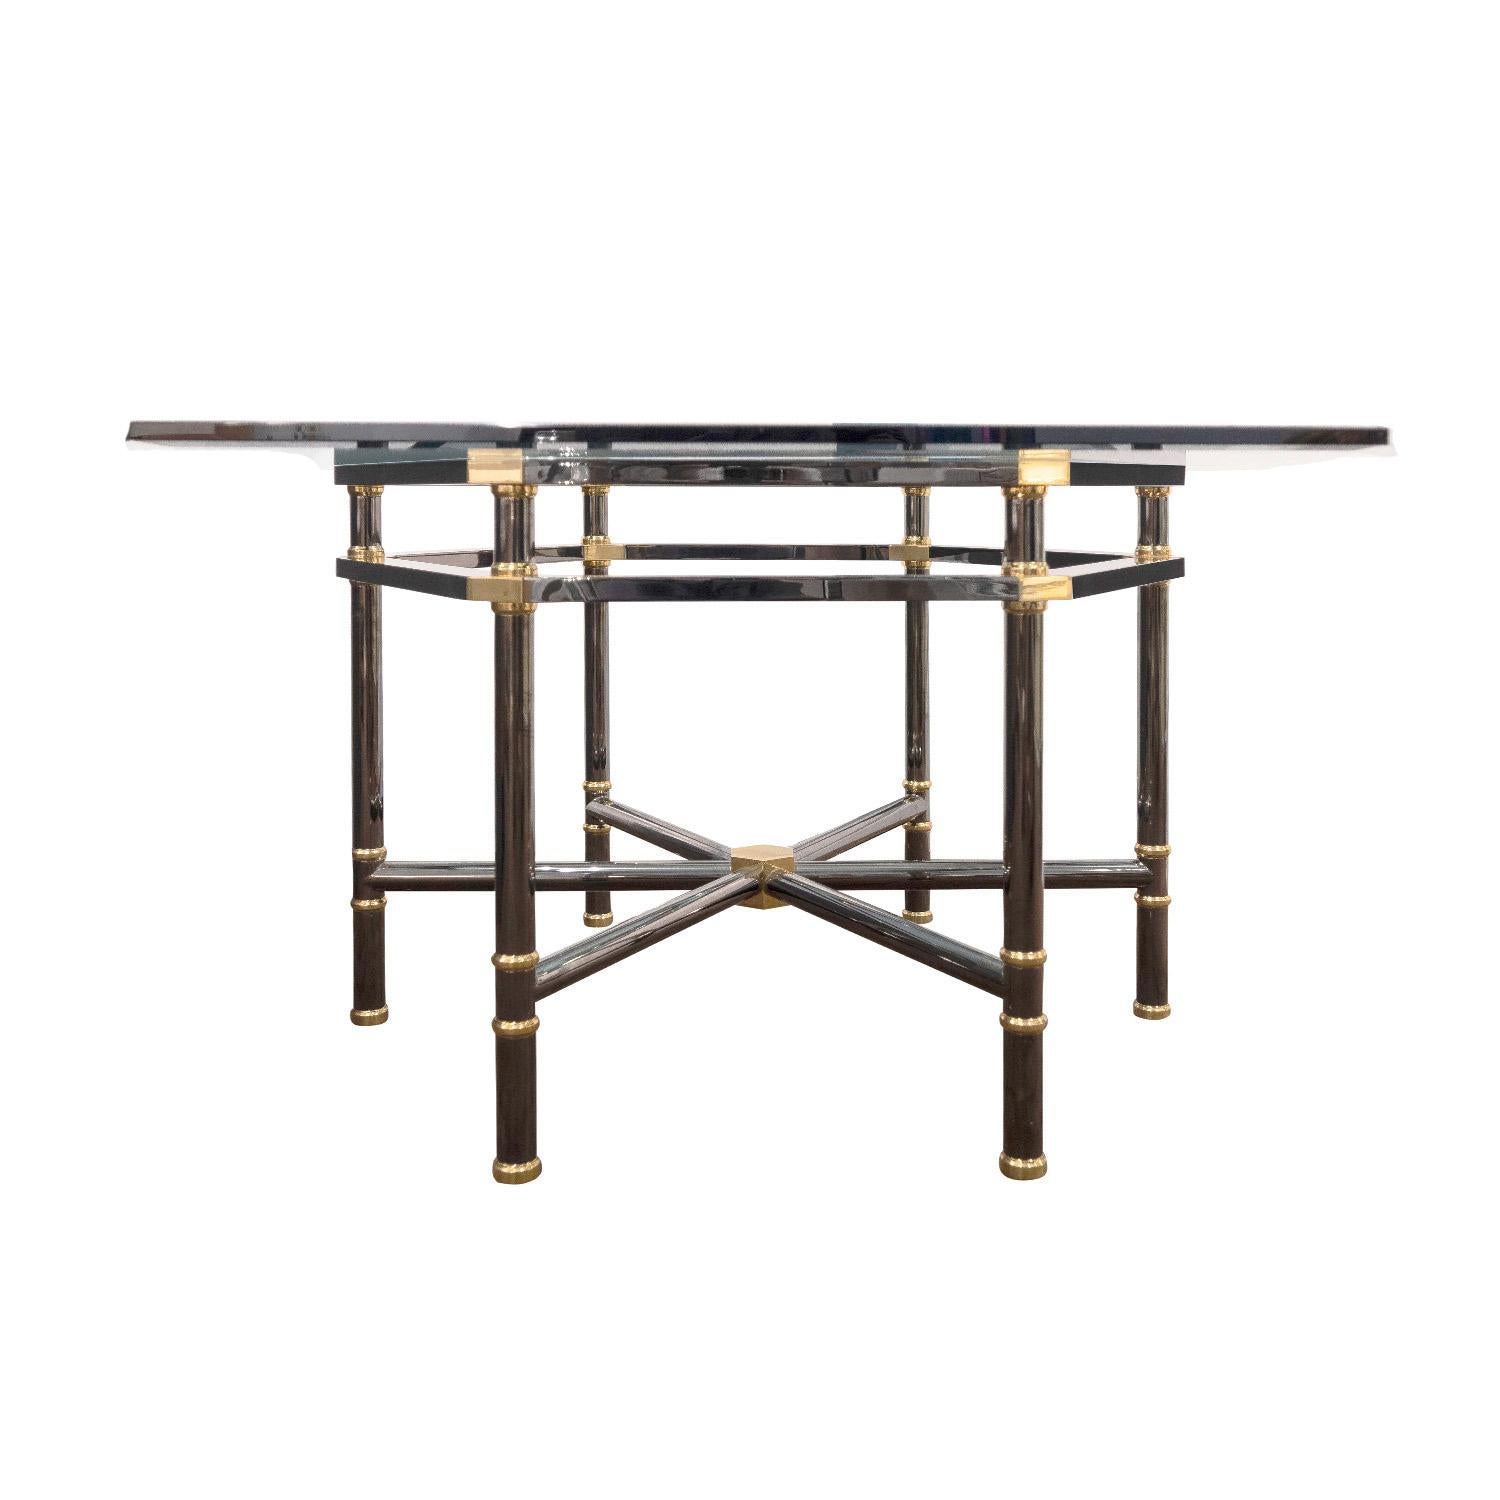 American Karl Springer Jansen Style Dining Table in Polished Gunmetal and Brass 1980s For Sale